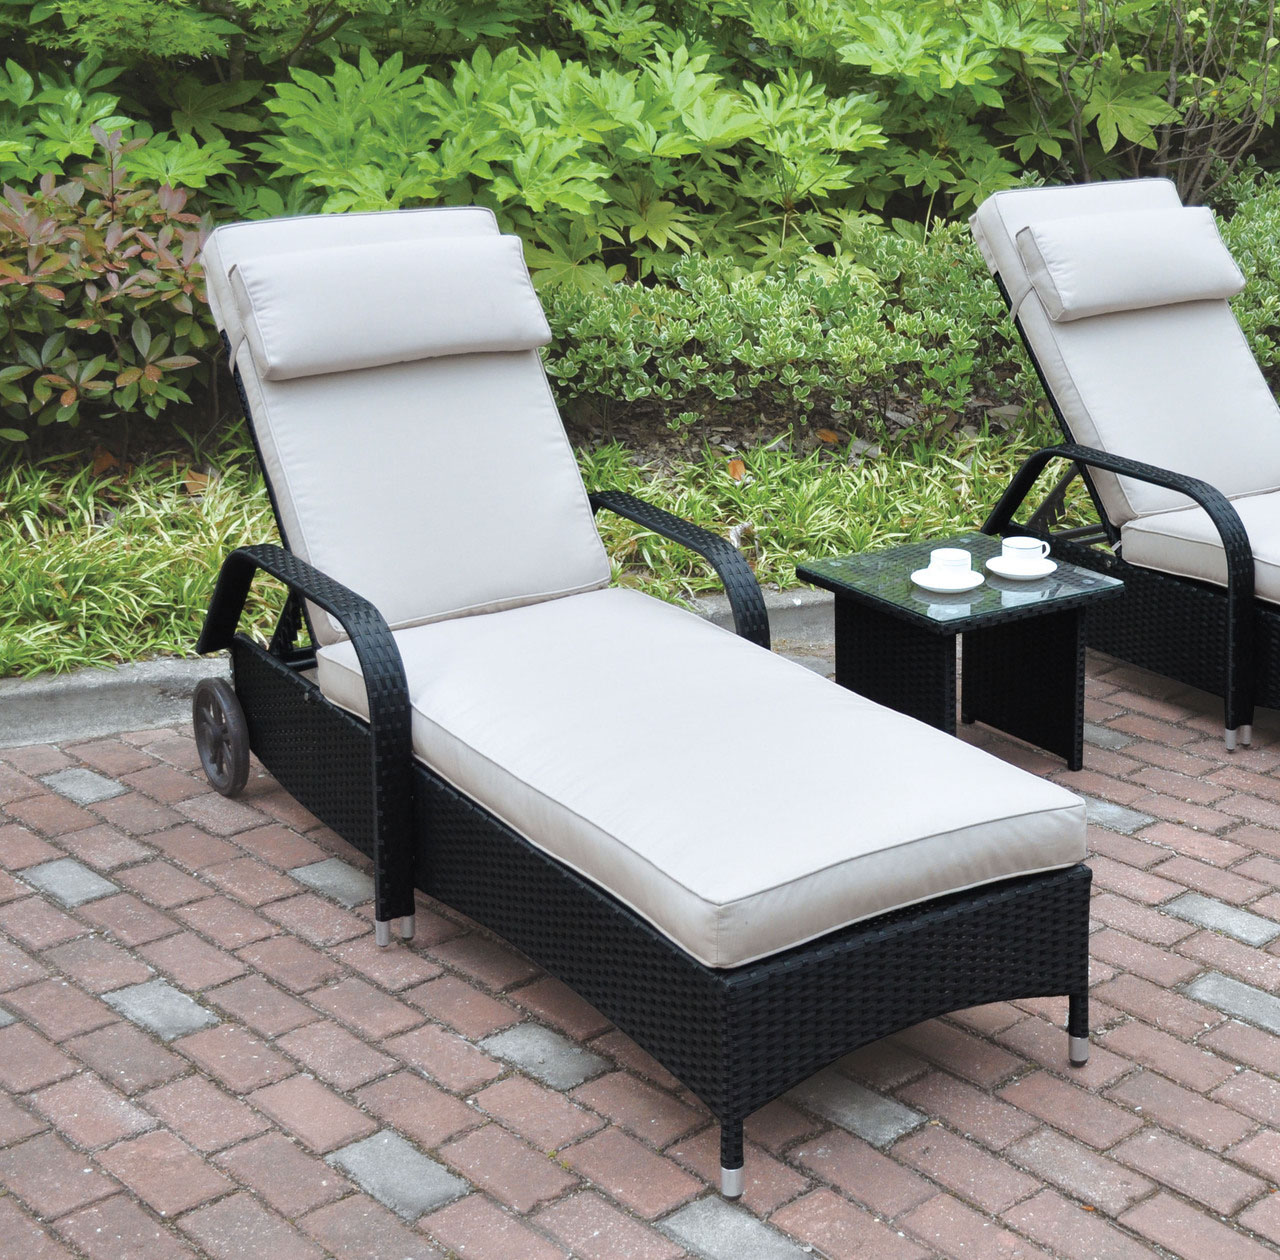 Outdoor Adjustable Lounger